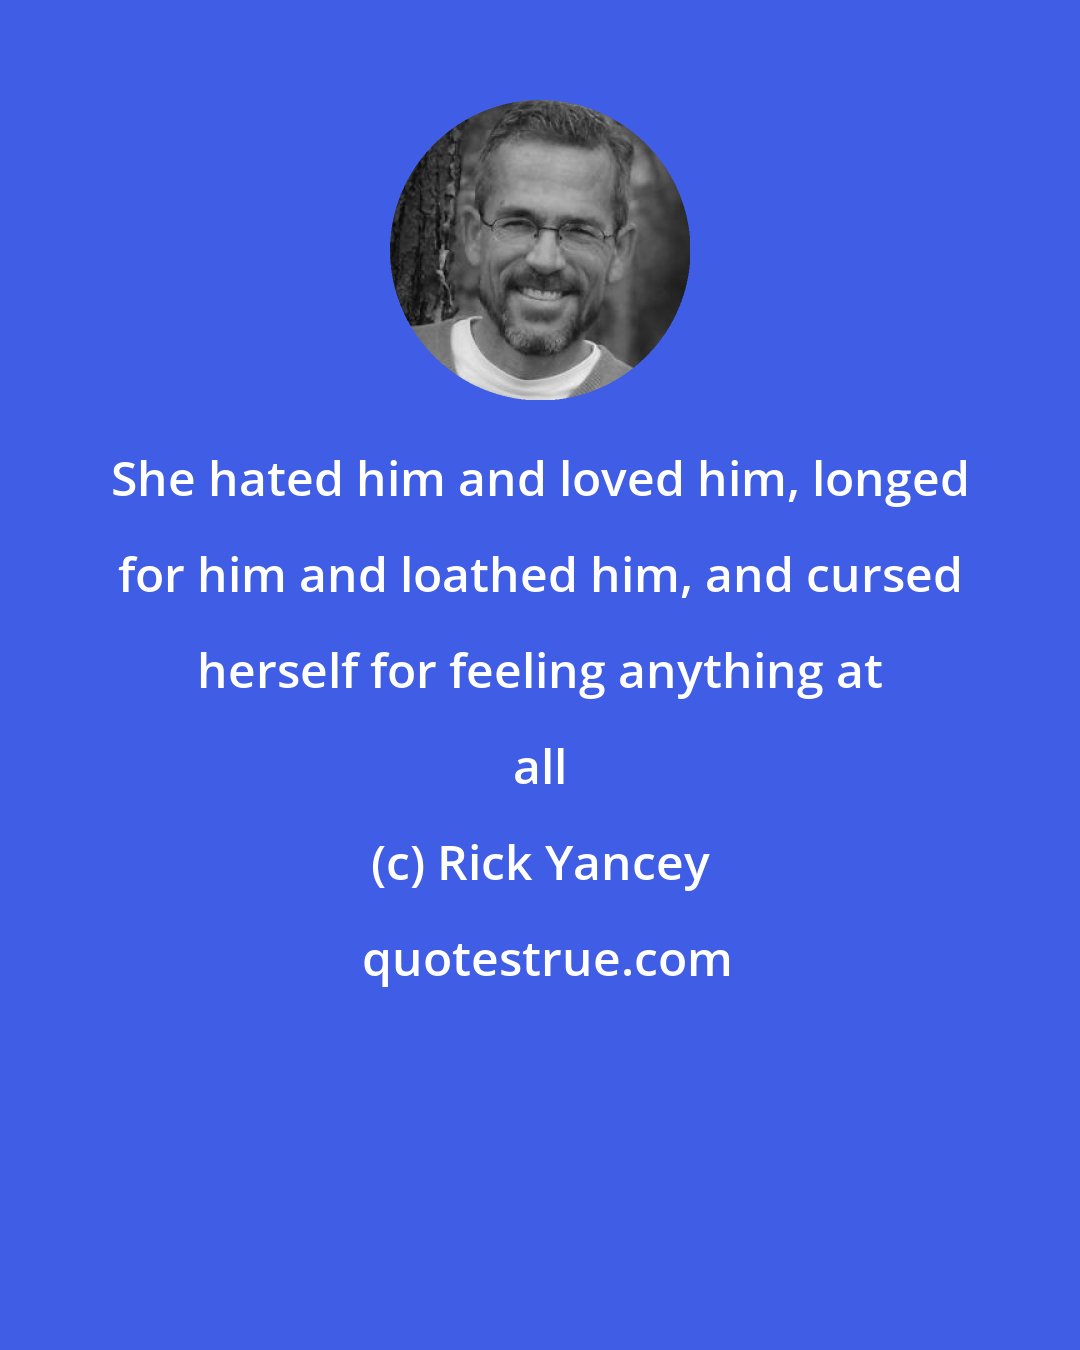 Rick Yancey: She hated him and loved him, longed for him and loathed him, and cursed herself for feeling anything at all